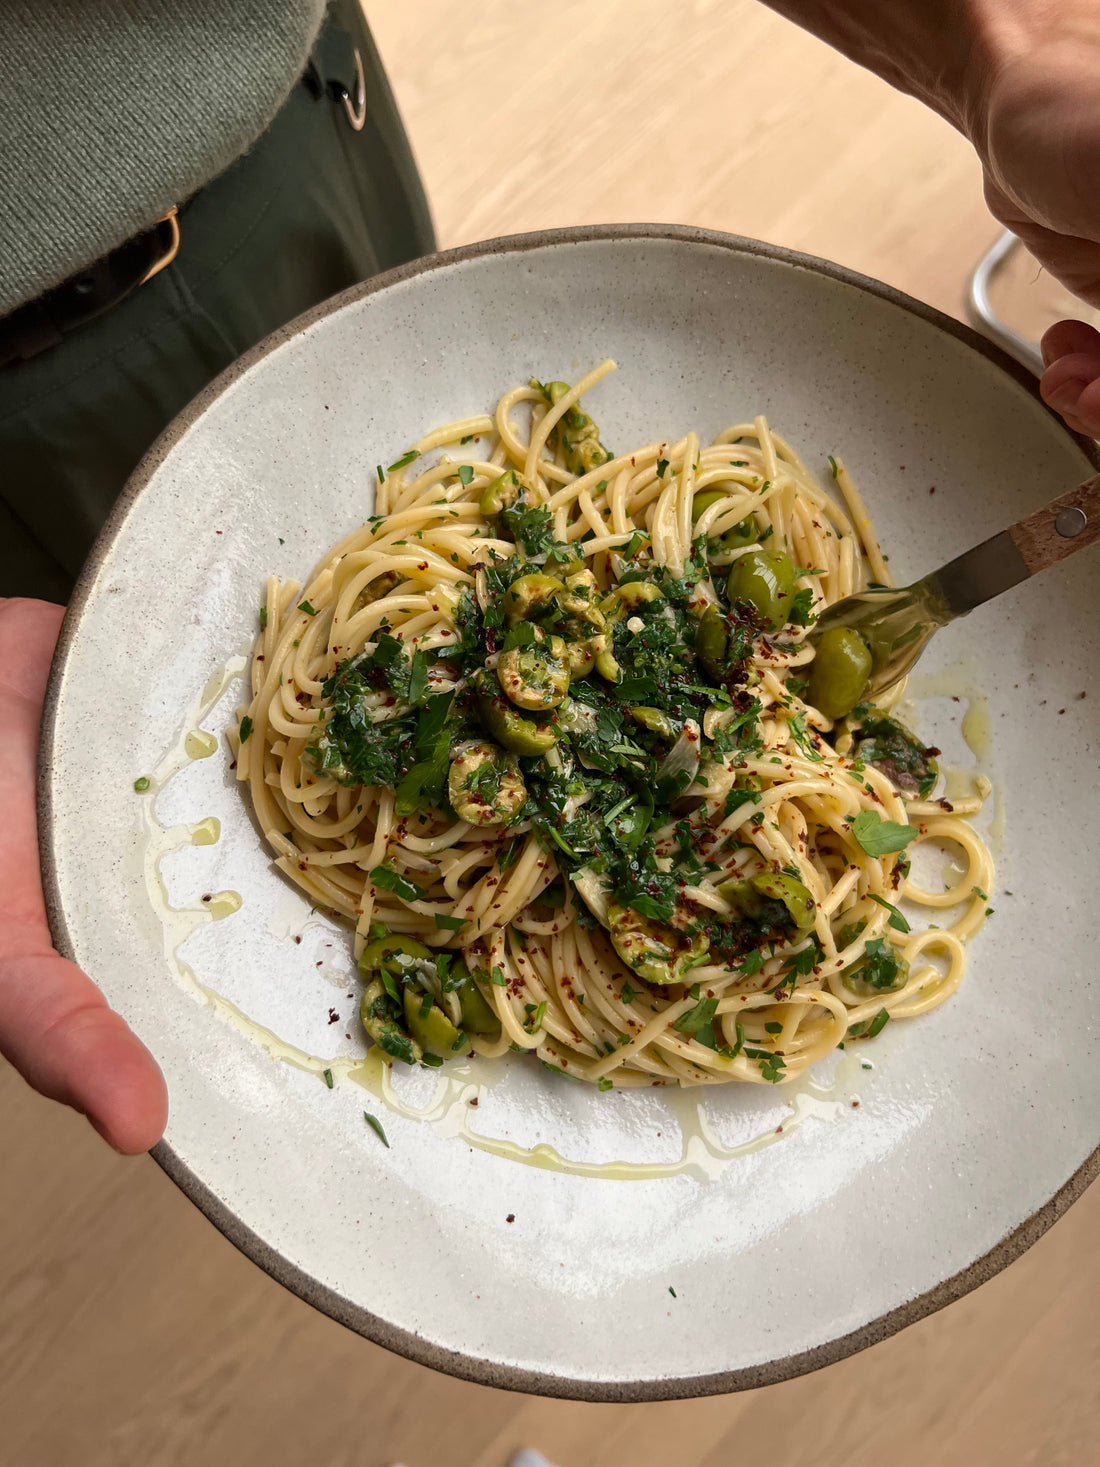 Green Olive Pasta with Chili, Lemon and lots of Parsley